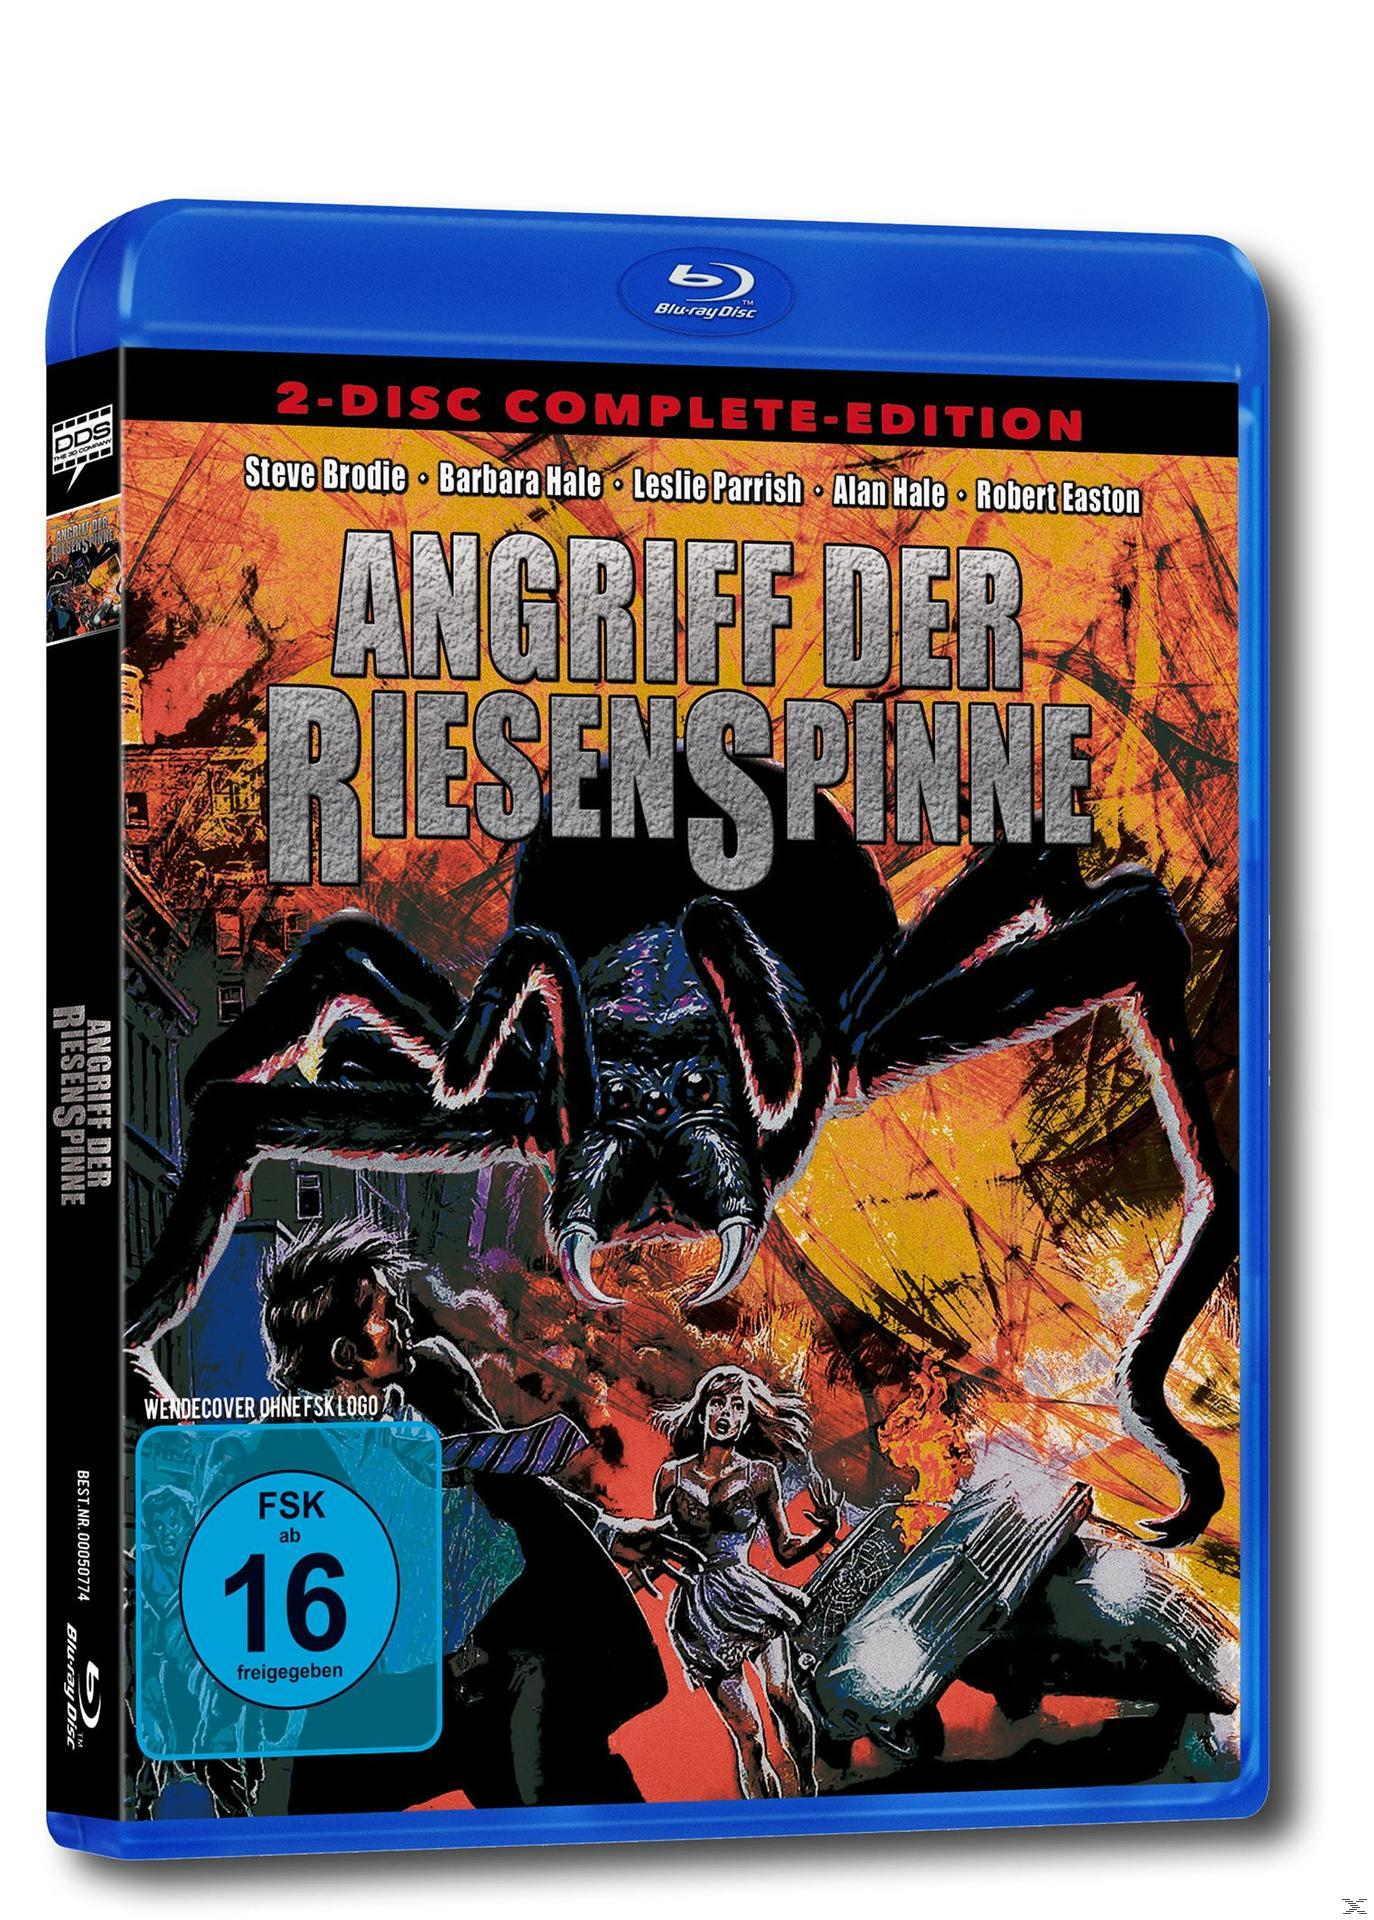 Edition Complete Angriff der Riesenspinne Blu-ray -